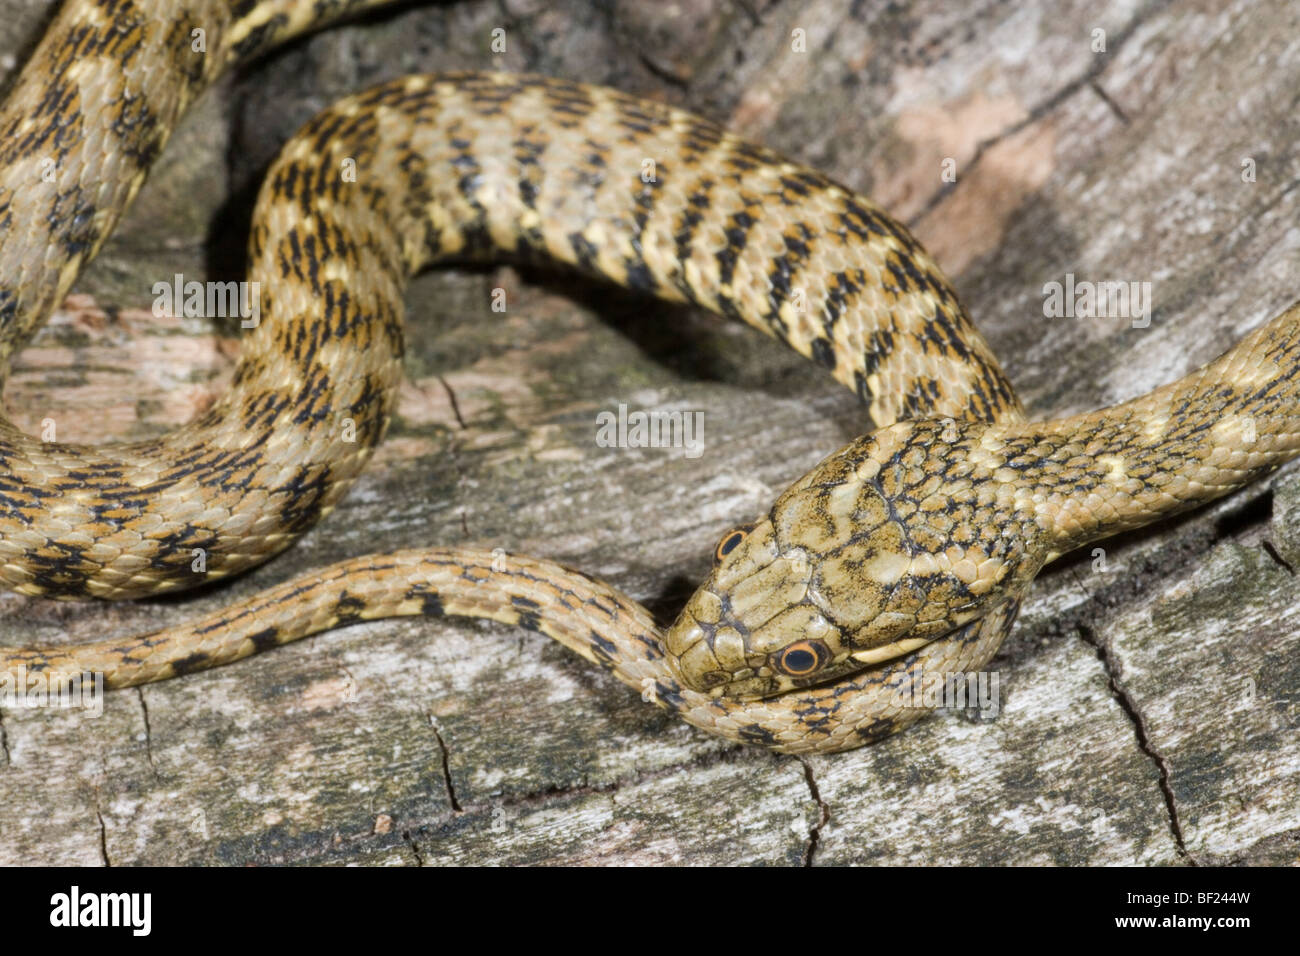 Viperine Snake (Natrix maura). SW Europe. North Africa. When moving, could be mistaken for a viper species by the markings. In fact harmless to people. Stock Photo